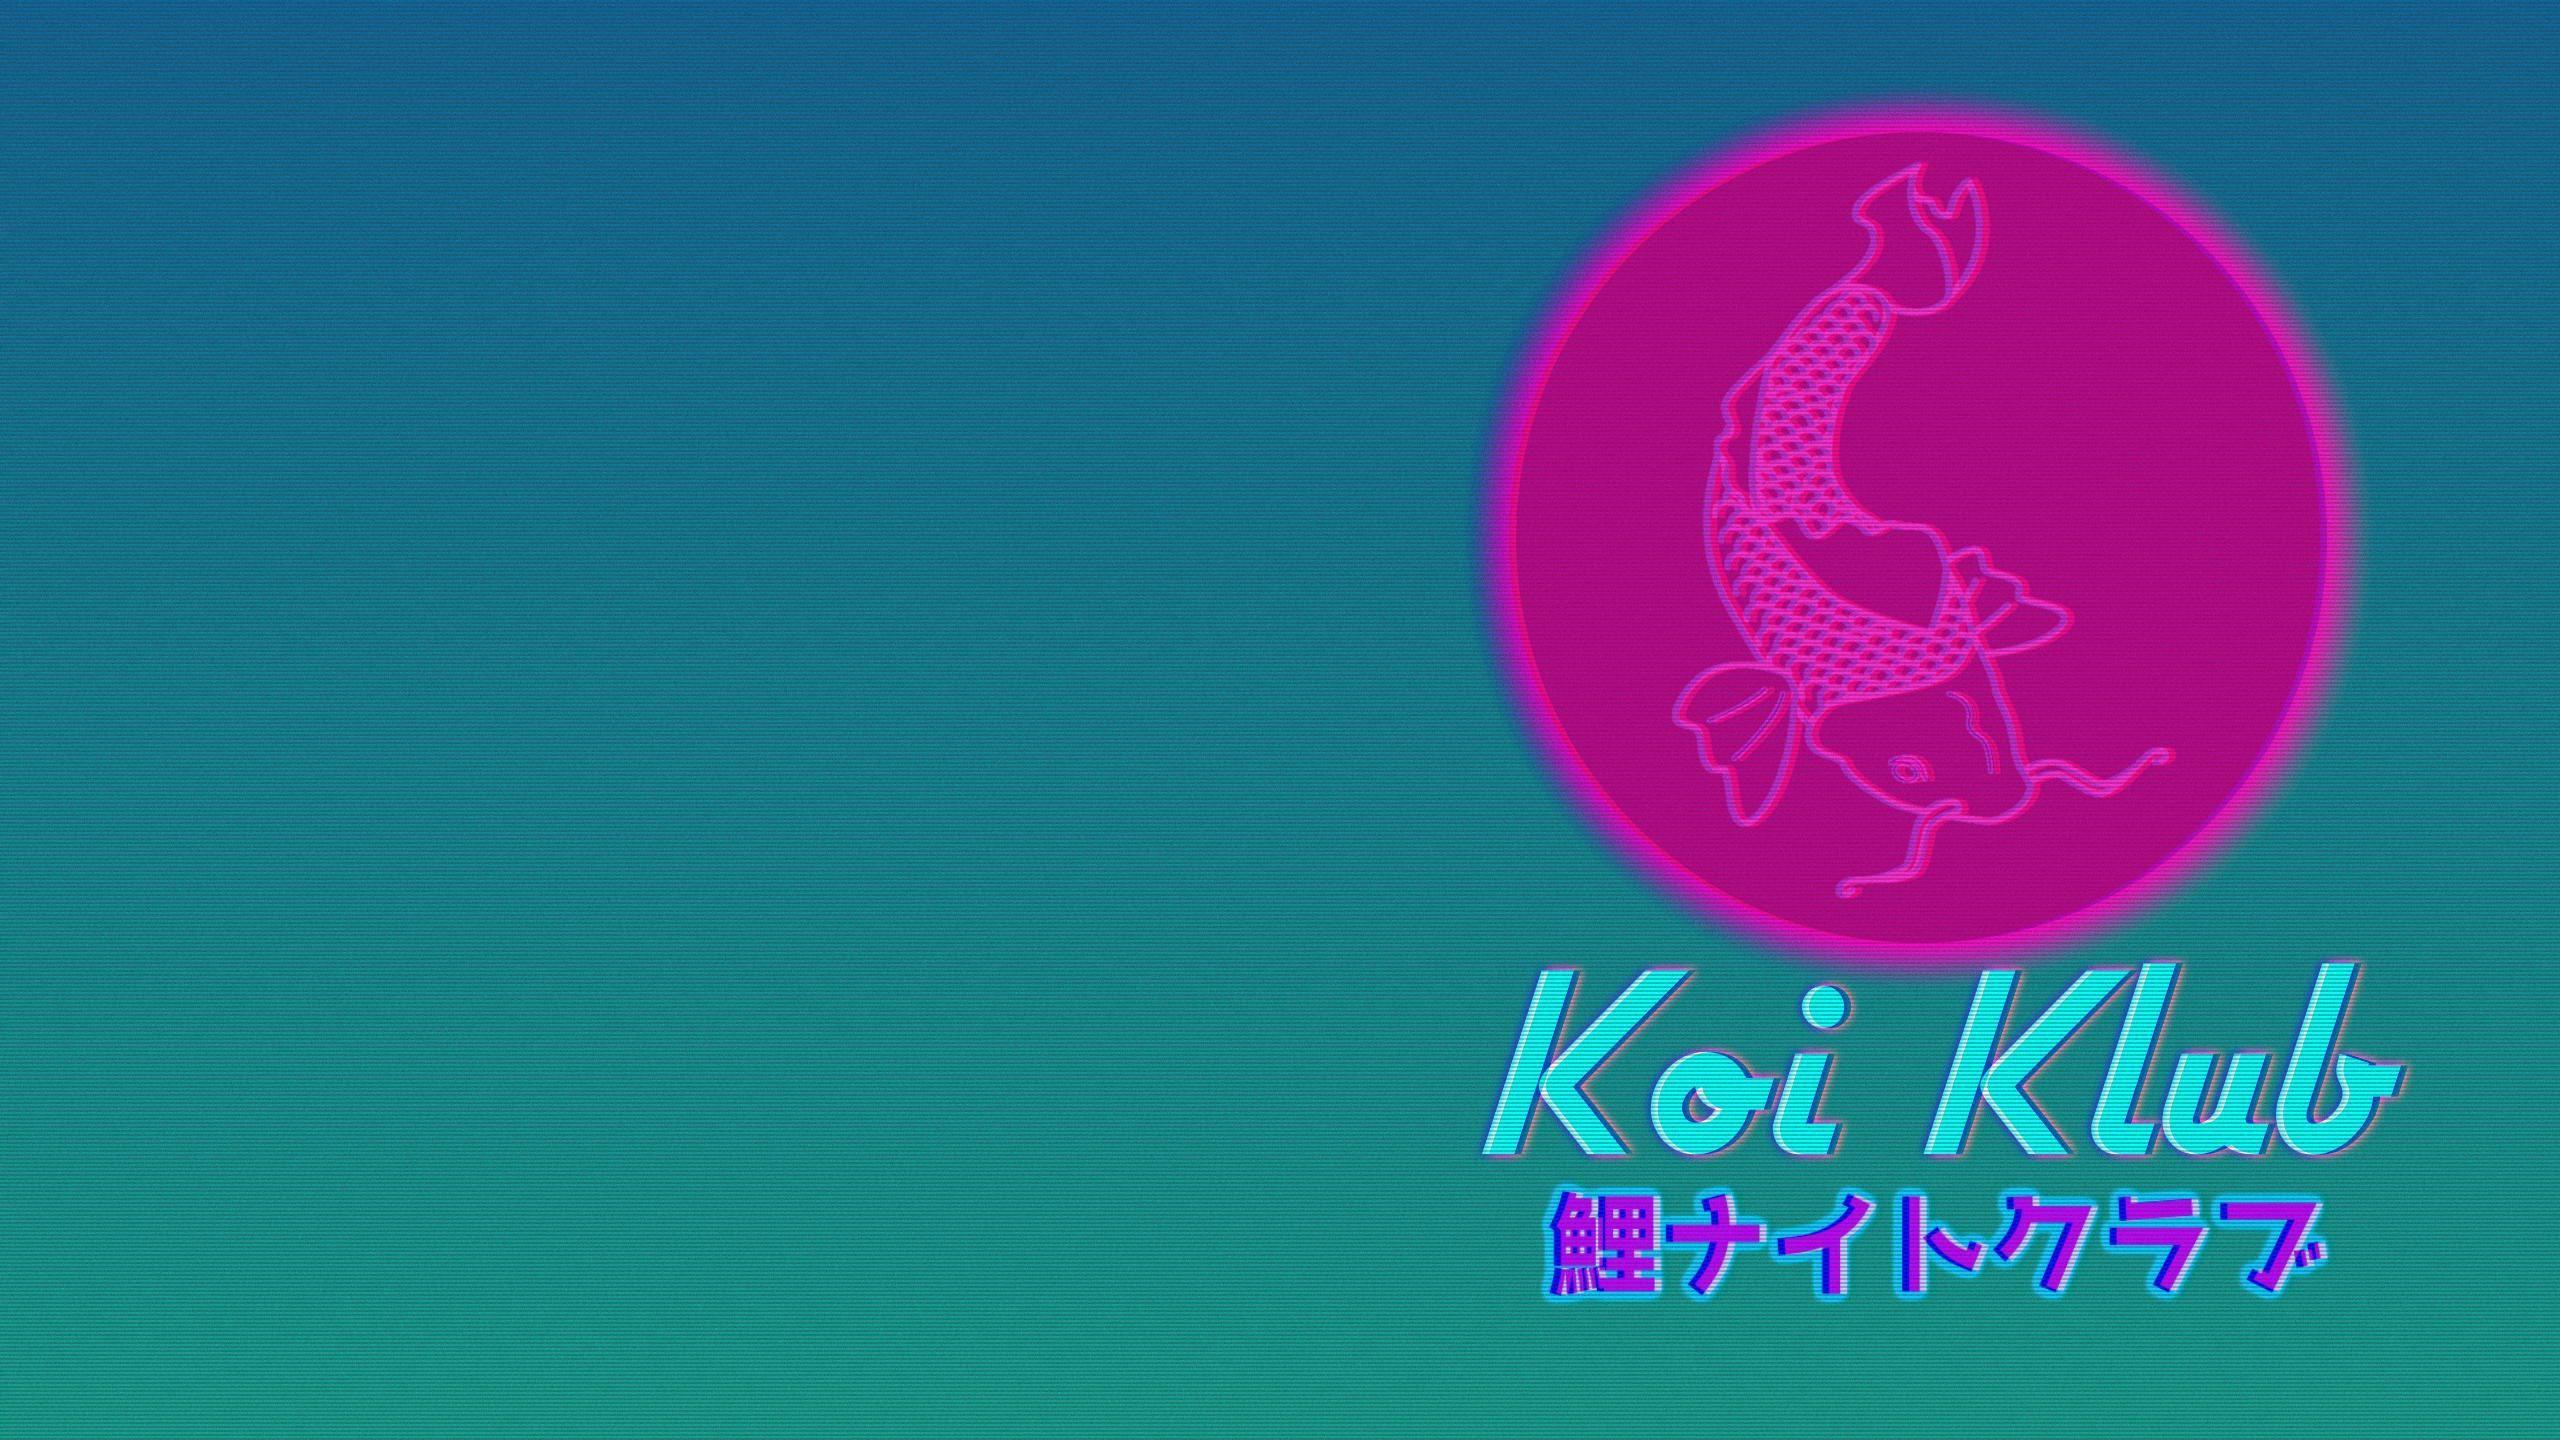 A Vaporwave wallpaper in preparation of the release of my next album